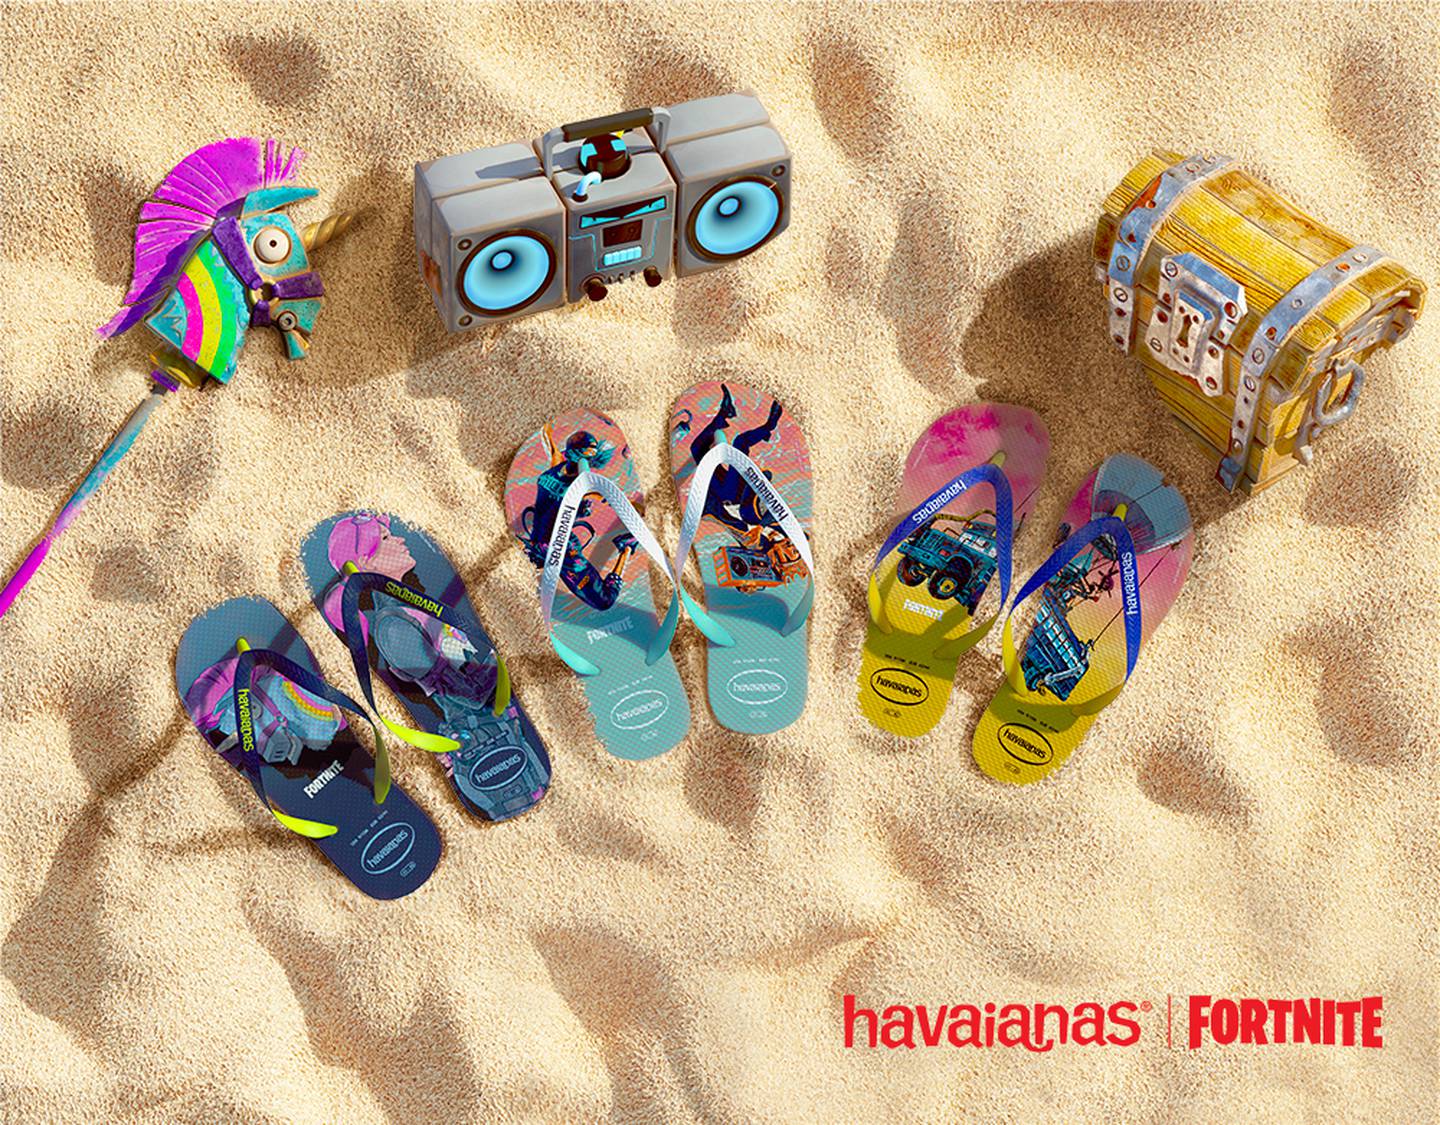 Some of the virtual Havaianas that will be available on Fortnite. Havaianas